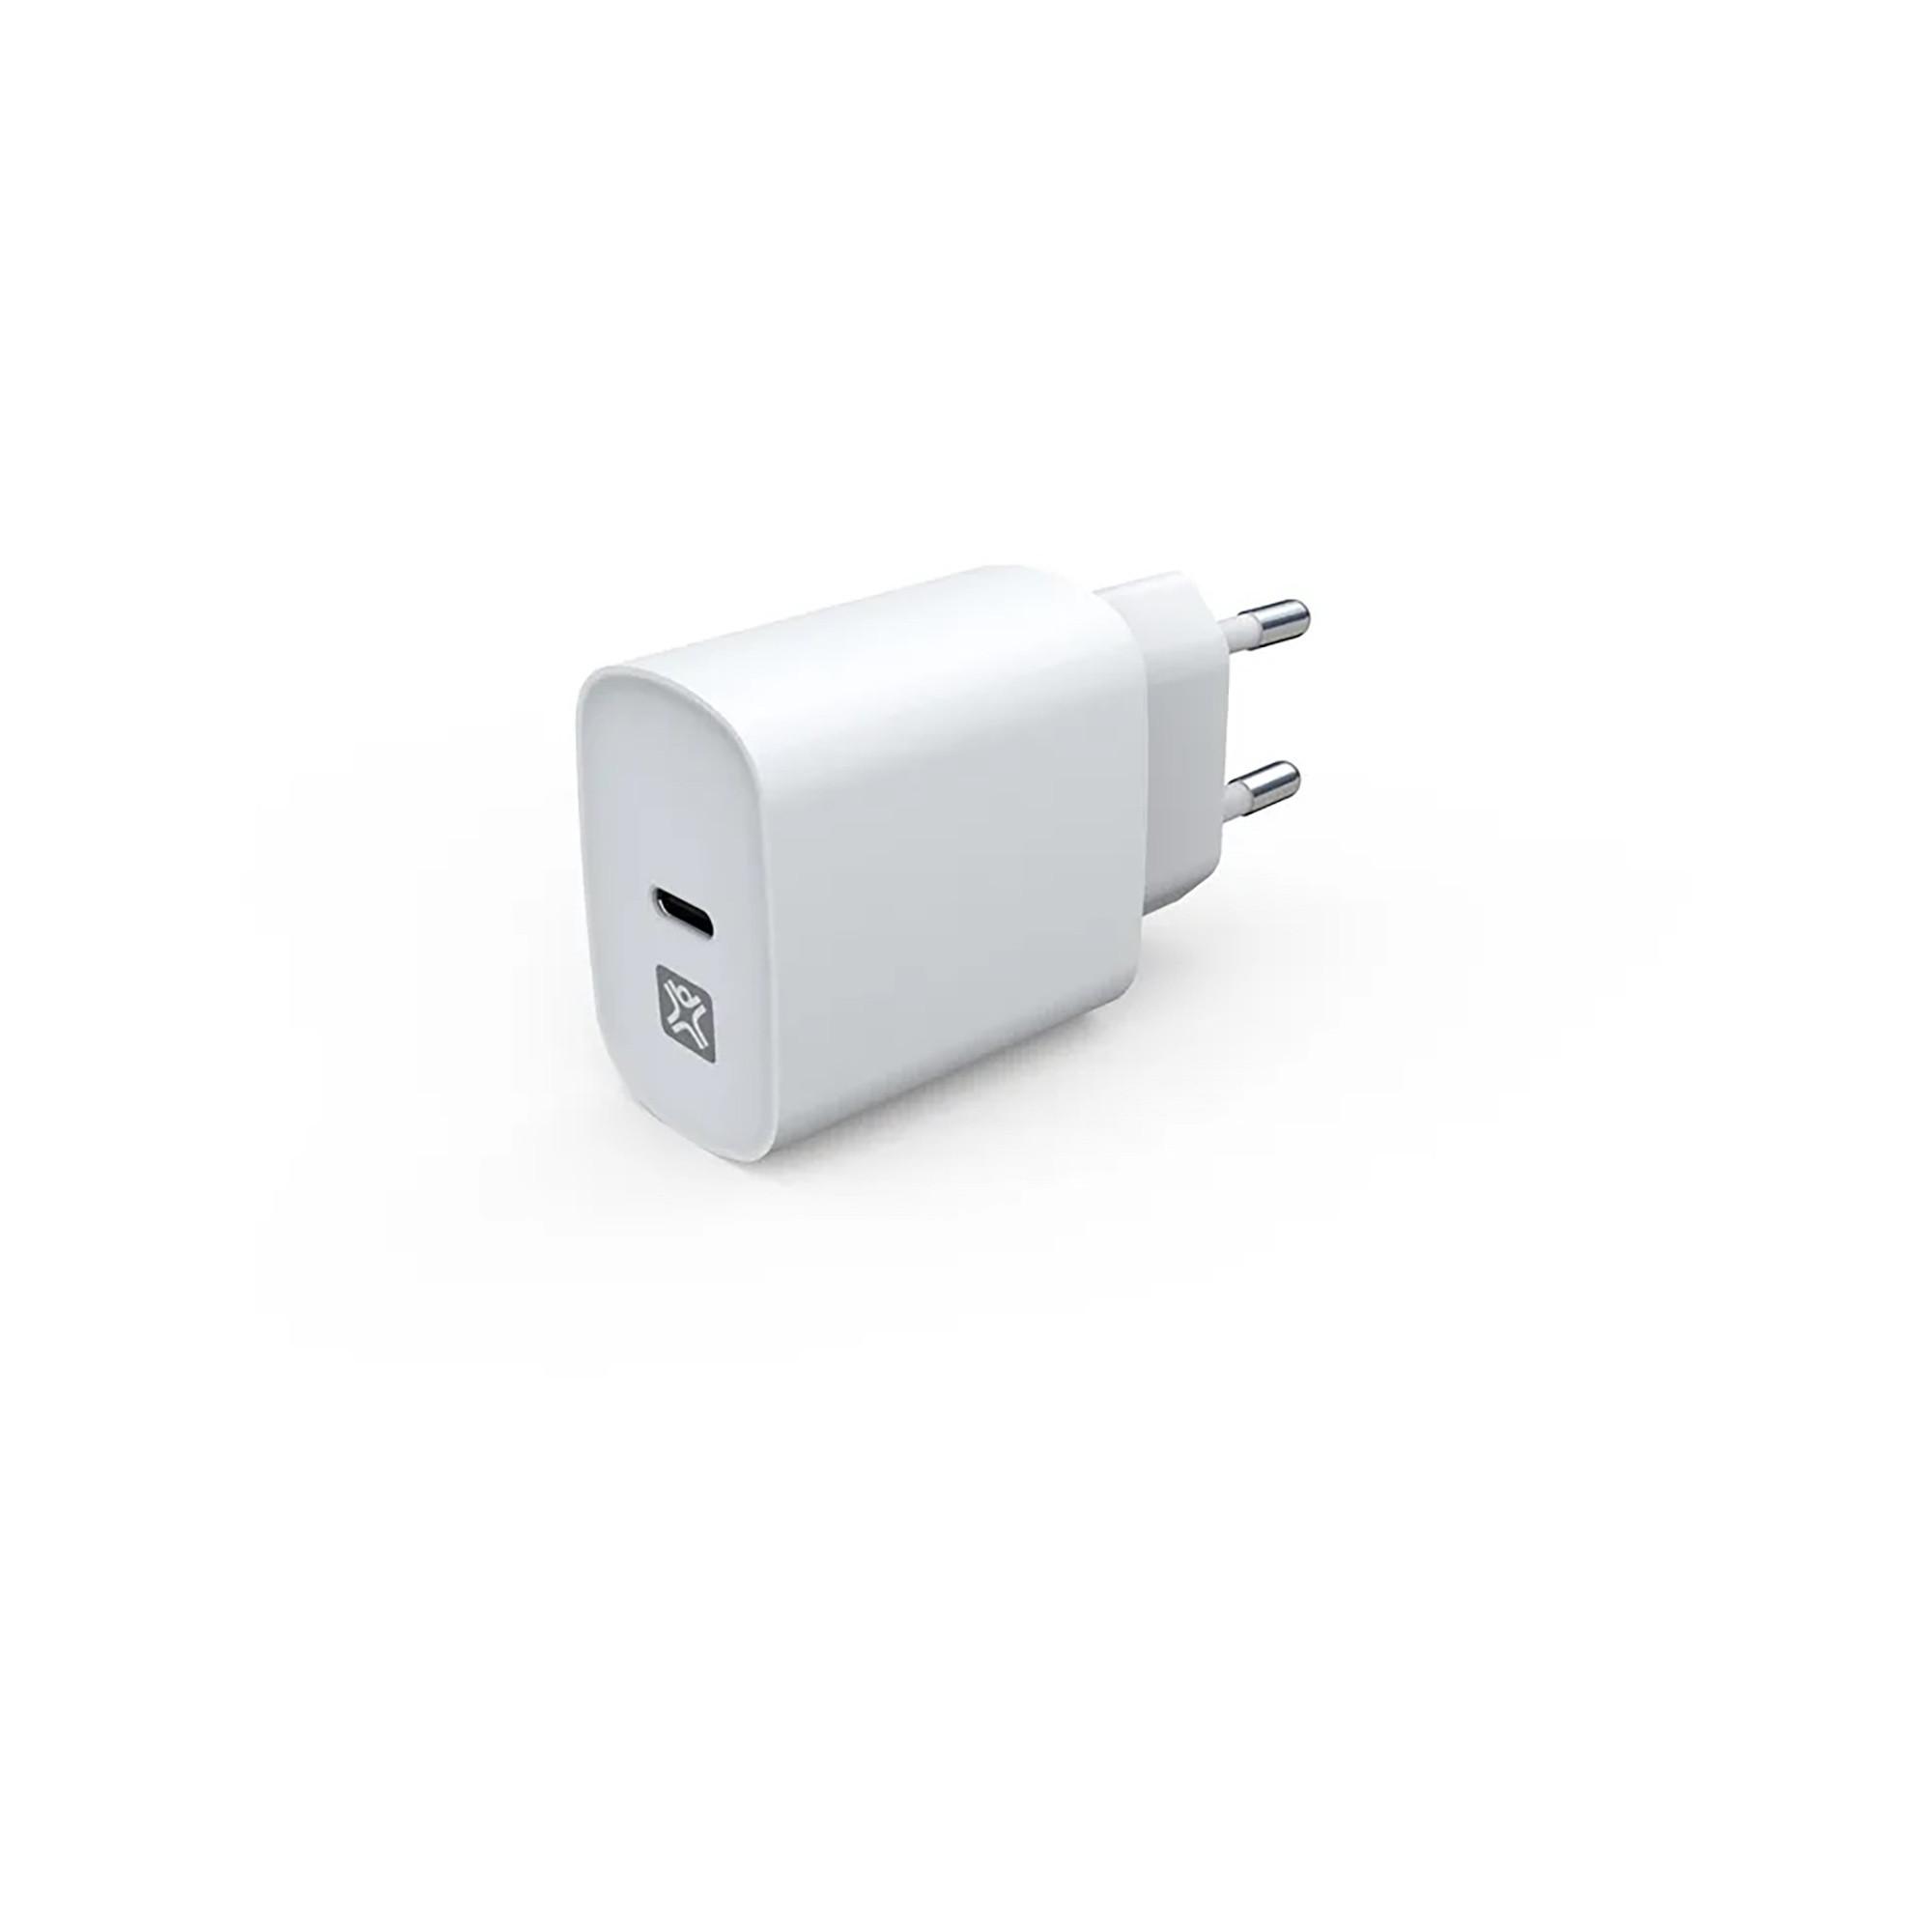 XtremeMac POWER DELIVERY USB-C 20W WALL CHARGER Chargeur USB
 